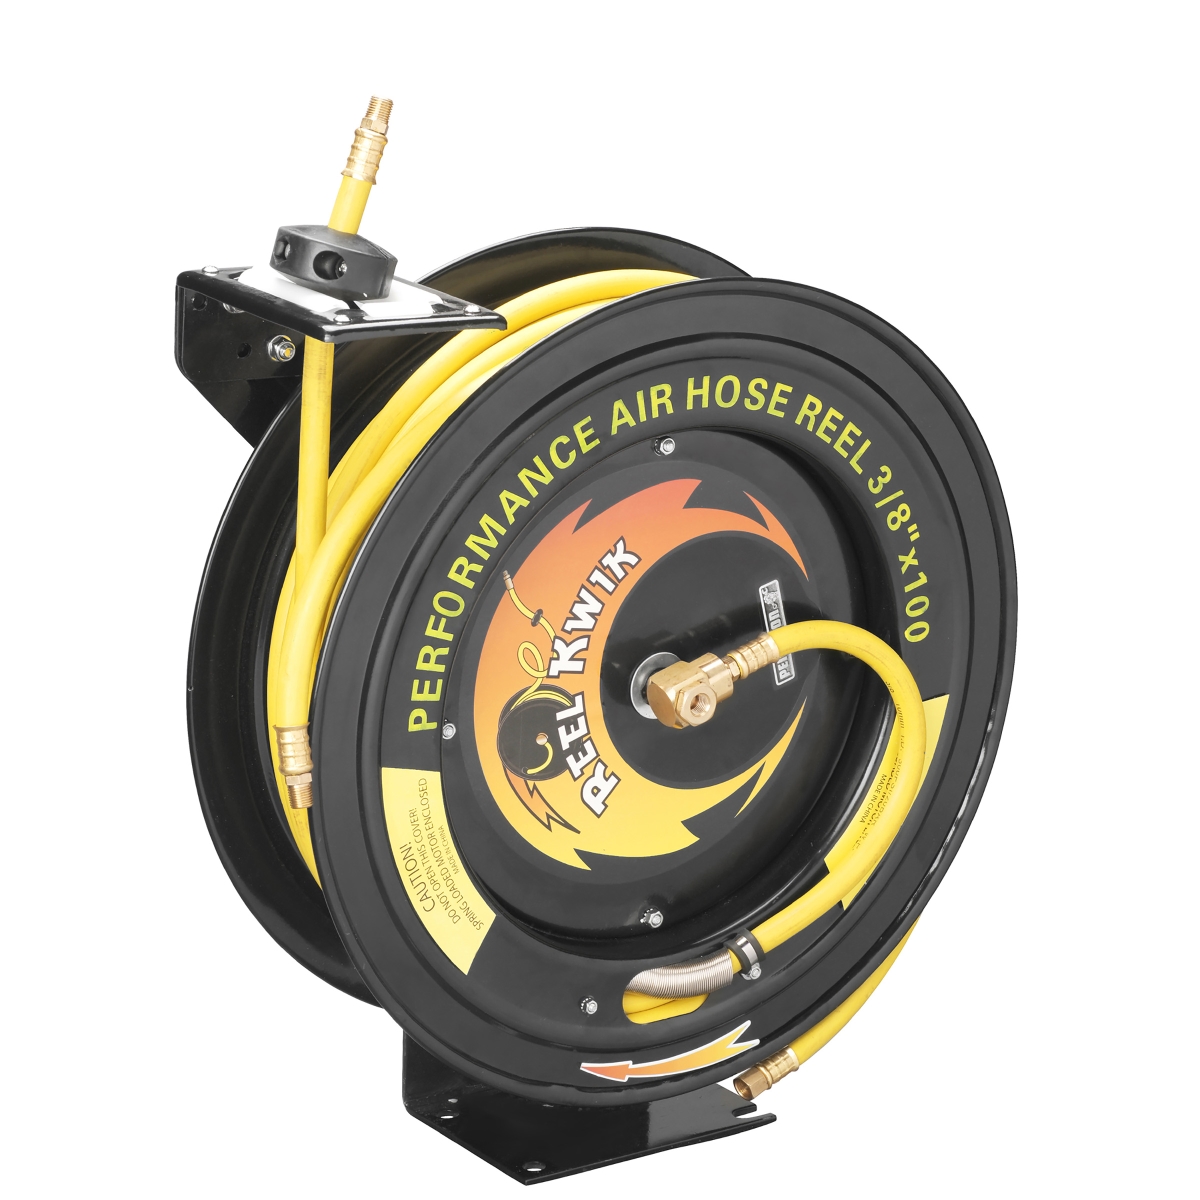 83-dt5346 3260 S 0.37 In. 300psi Heavy Duty Retractable 100 Ft. Air Hose & Reel Professional Grade